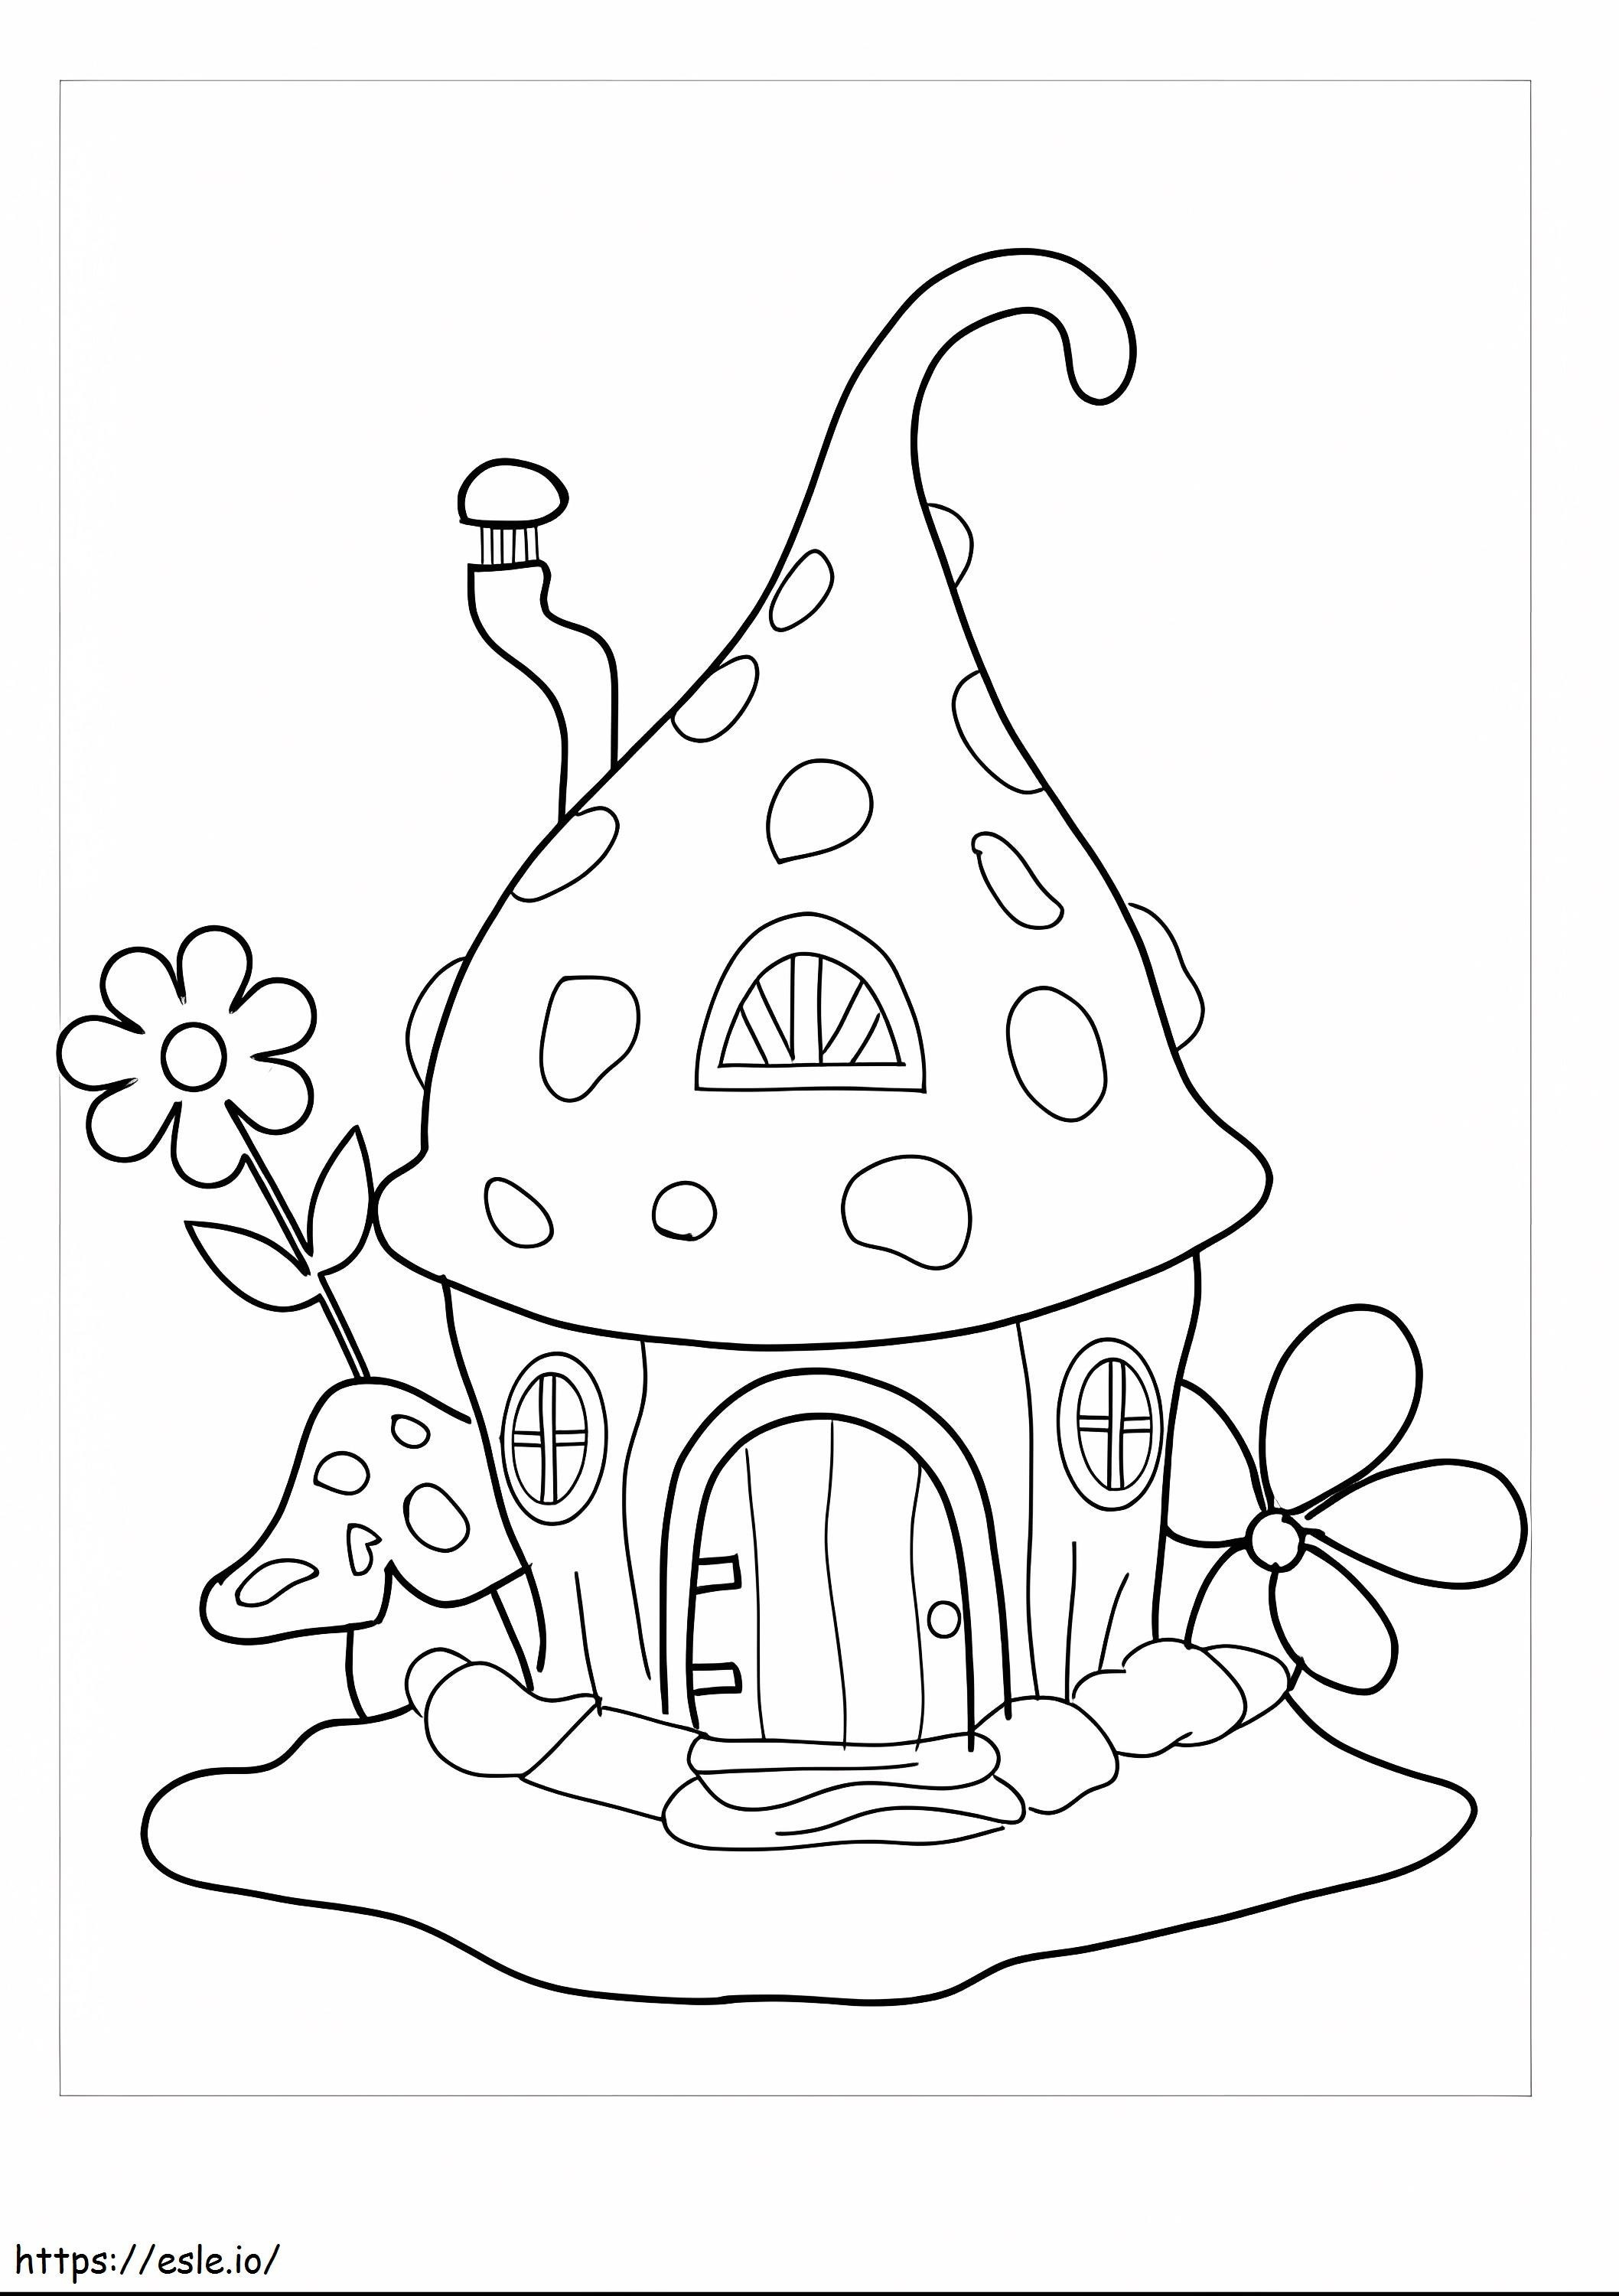 Simple House coloring page